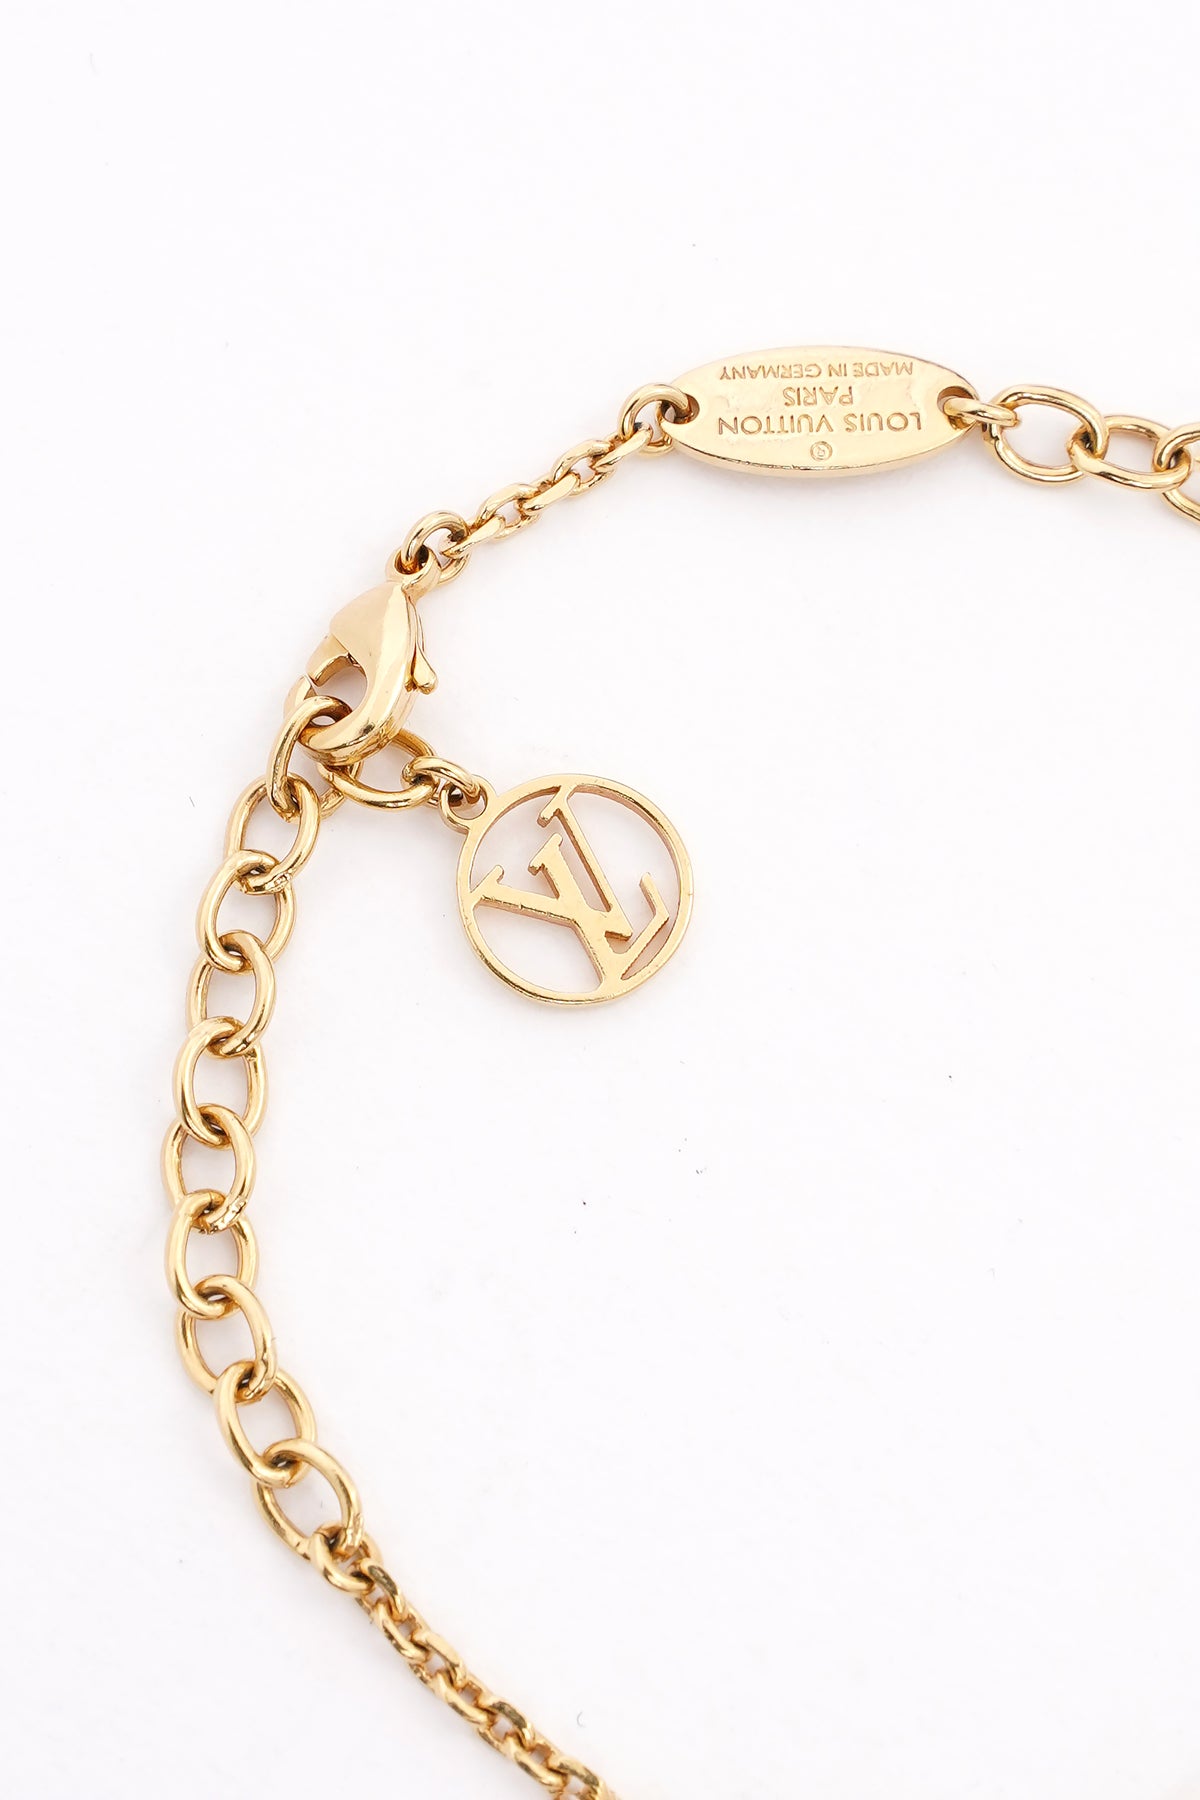 Louis Vuitton Collier Blooming Necklace Ladies' Gold Accessories